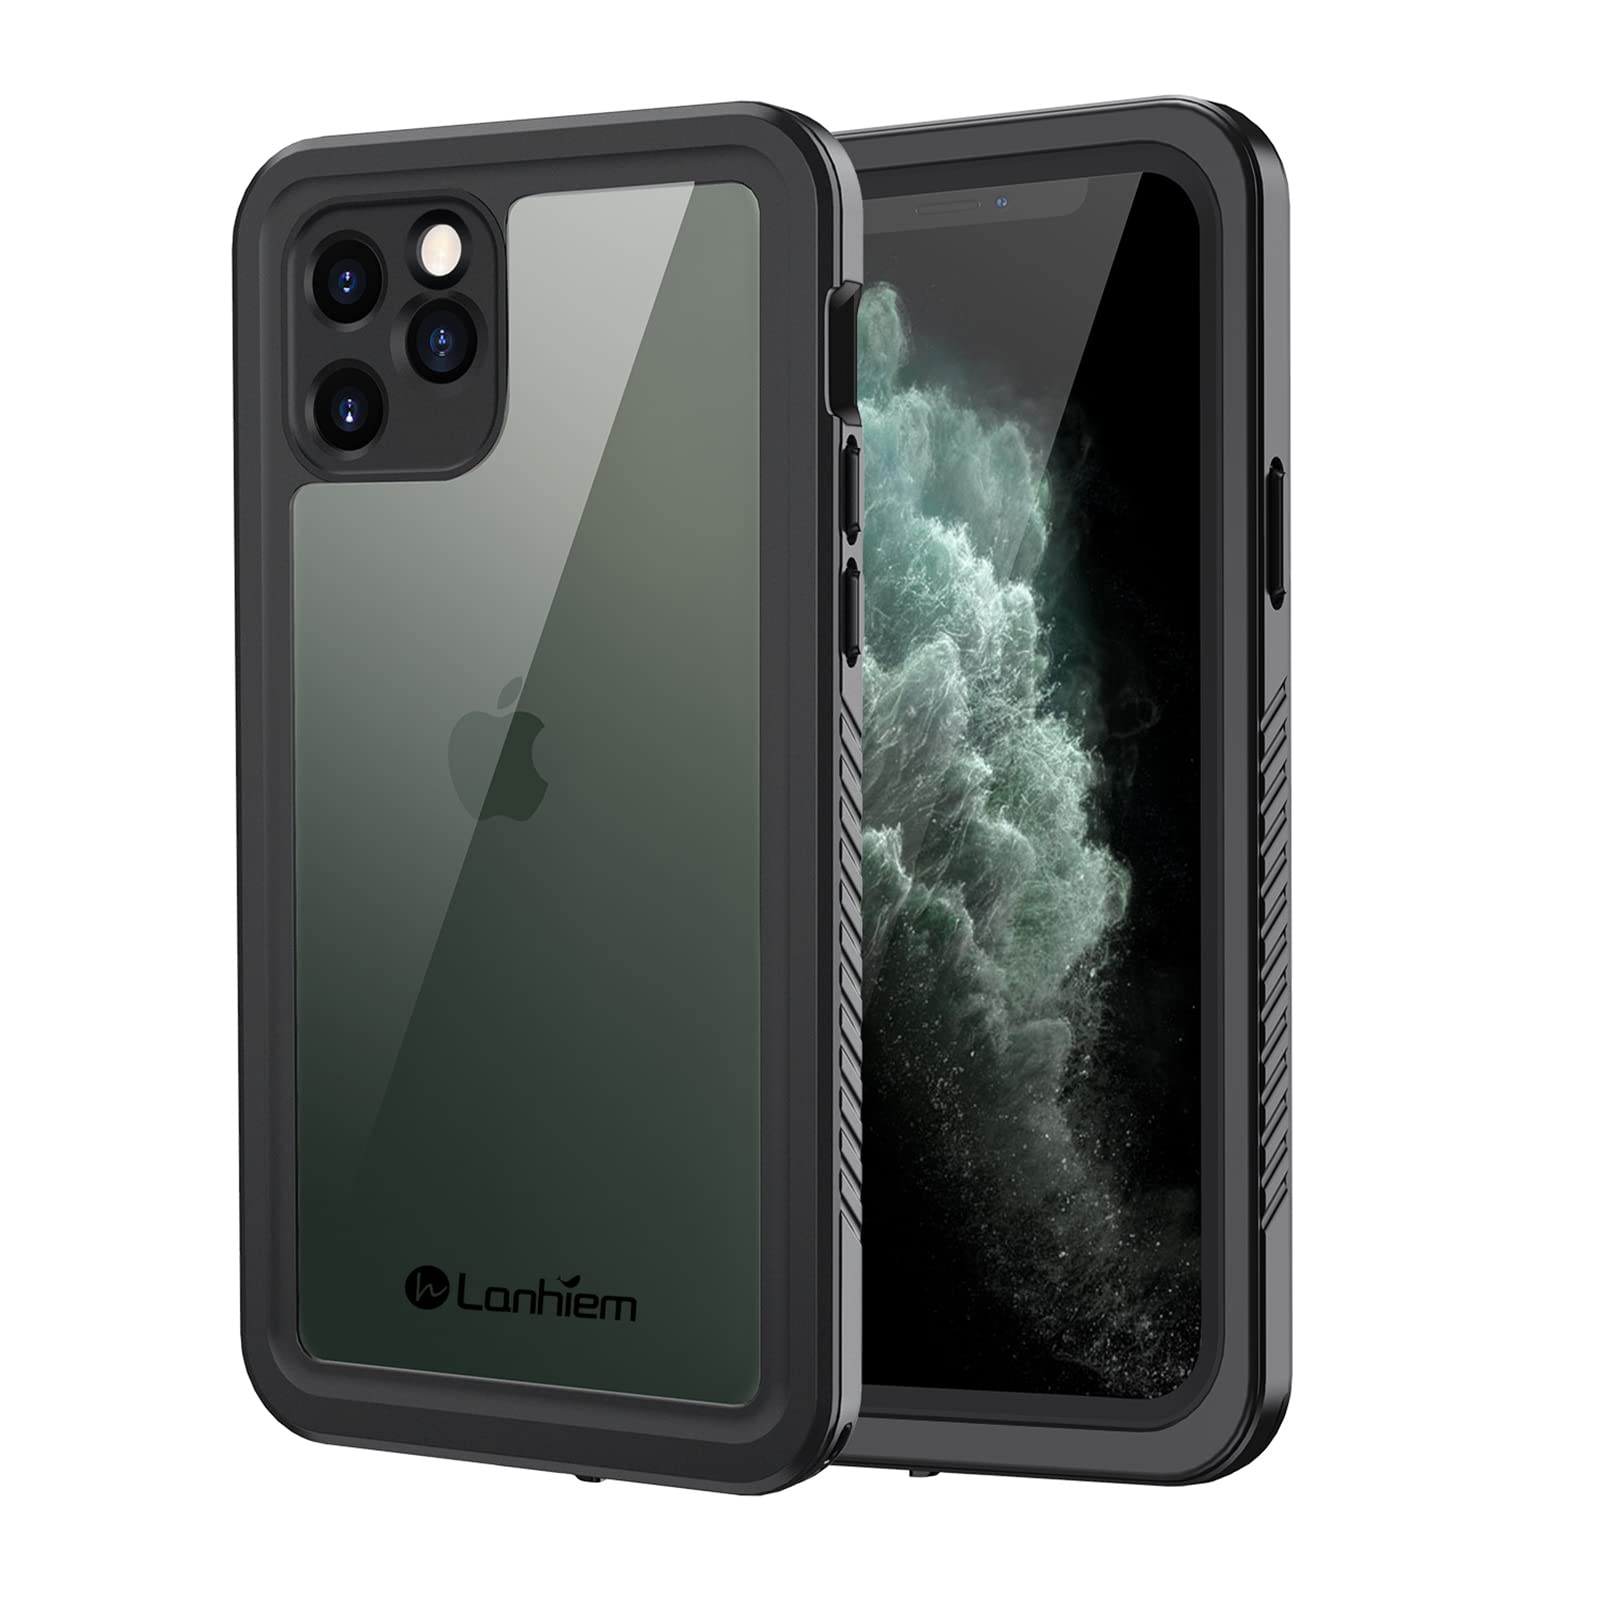 Lanhiem iPhone 11 Pro Case, IP68 Waterproof Dustproof Shockproof Case with Built-in Screen Protector, Full Body Protective Front and Clear Cover for iPhone 11 Pro (Black)